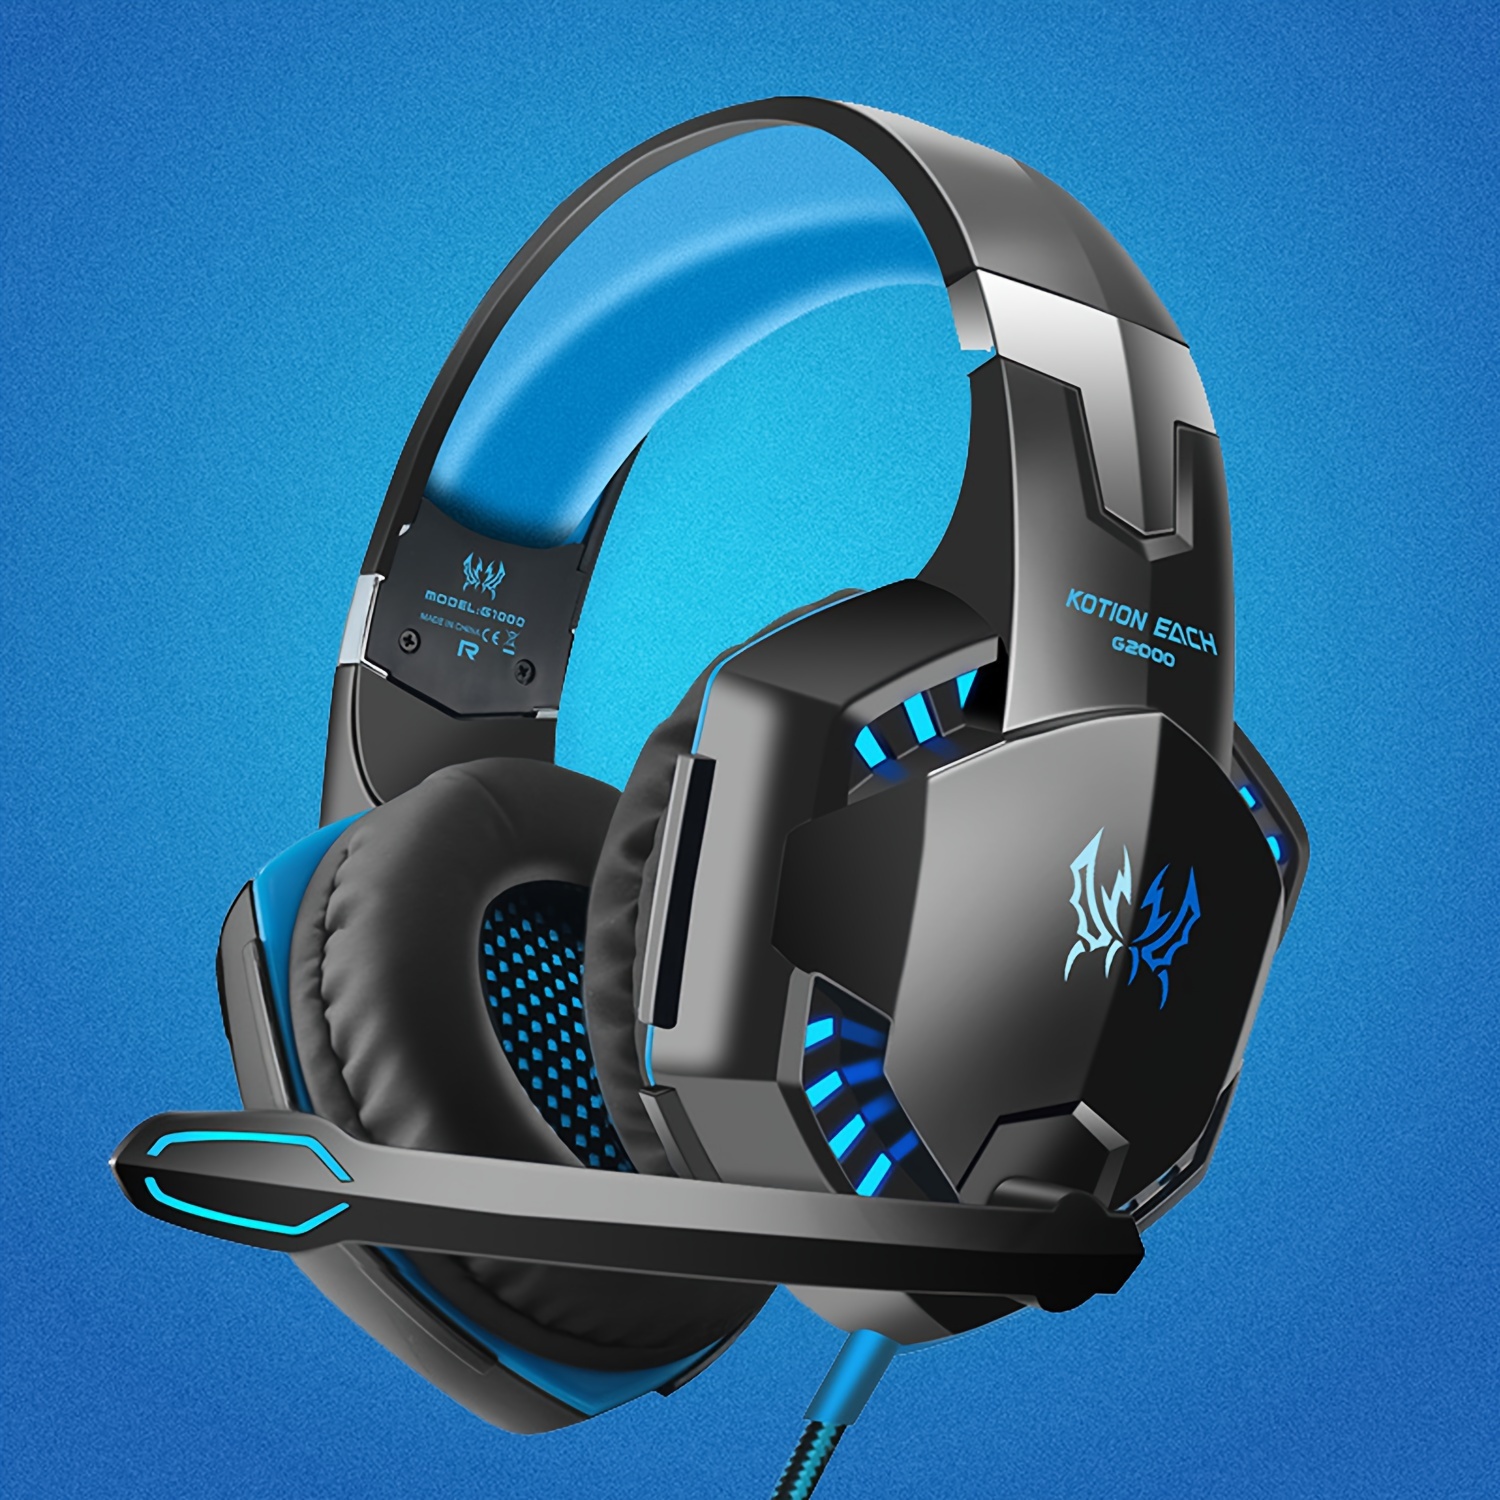 G2000 Gaming Headset: Experience Immersive Audio With Noise Cancelling Mic,  LED Lights & Soft Memory Earmuffs